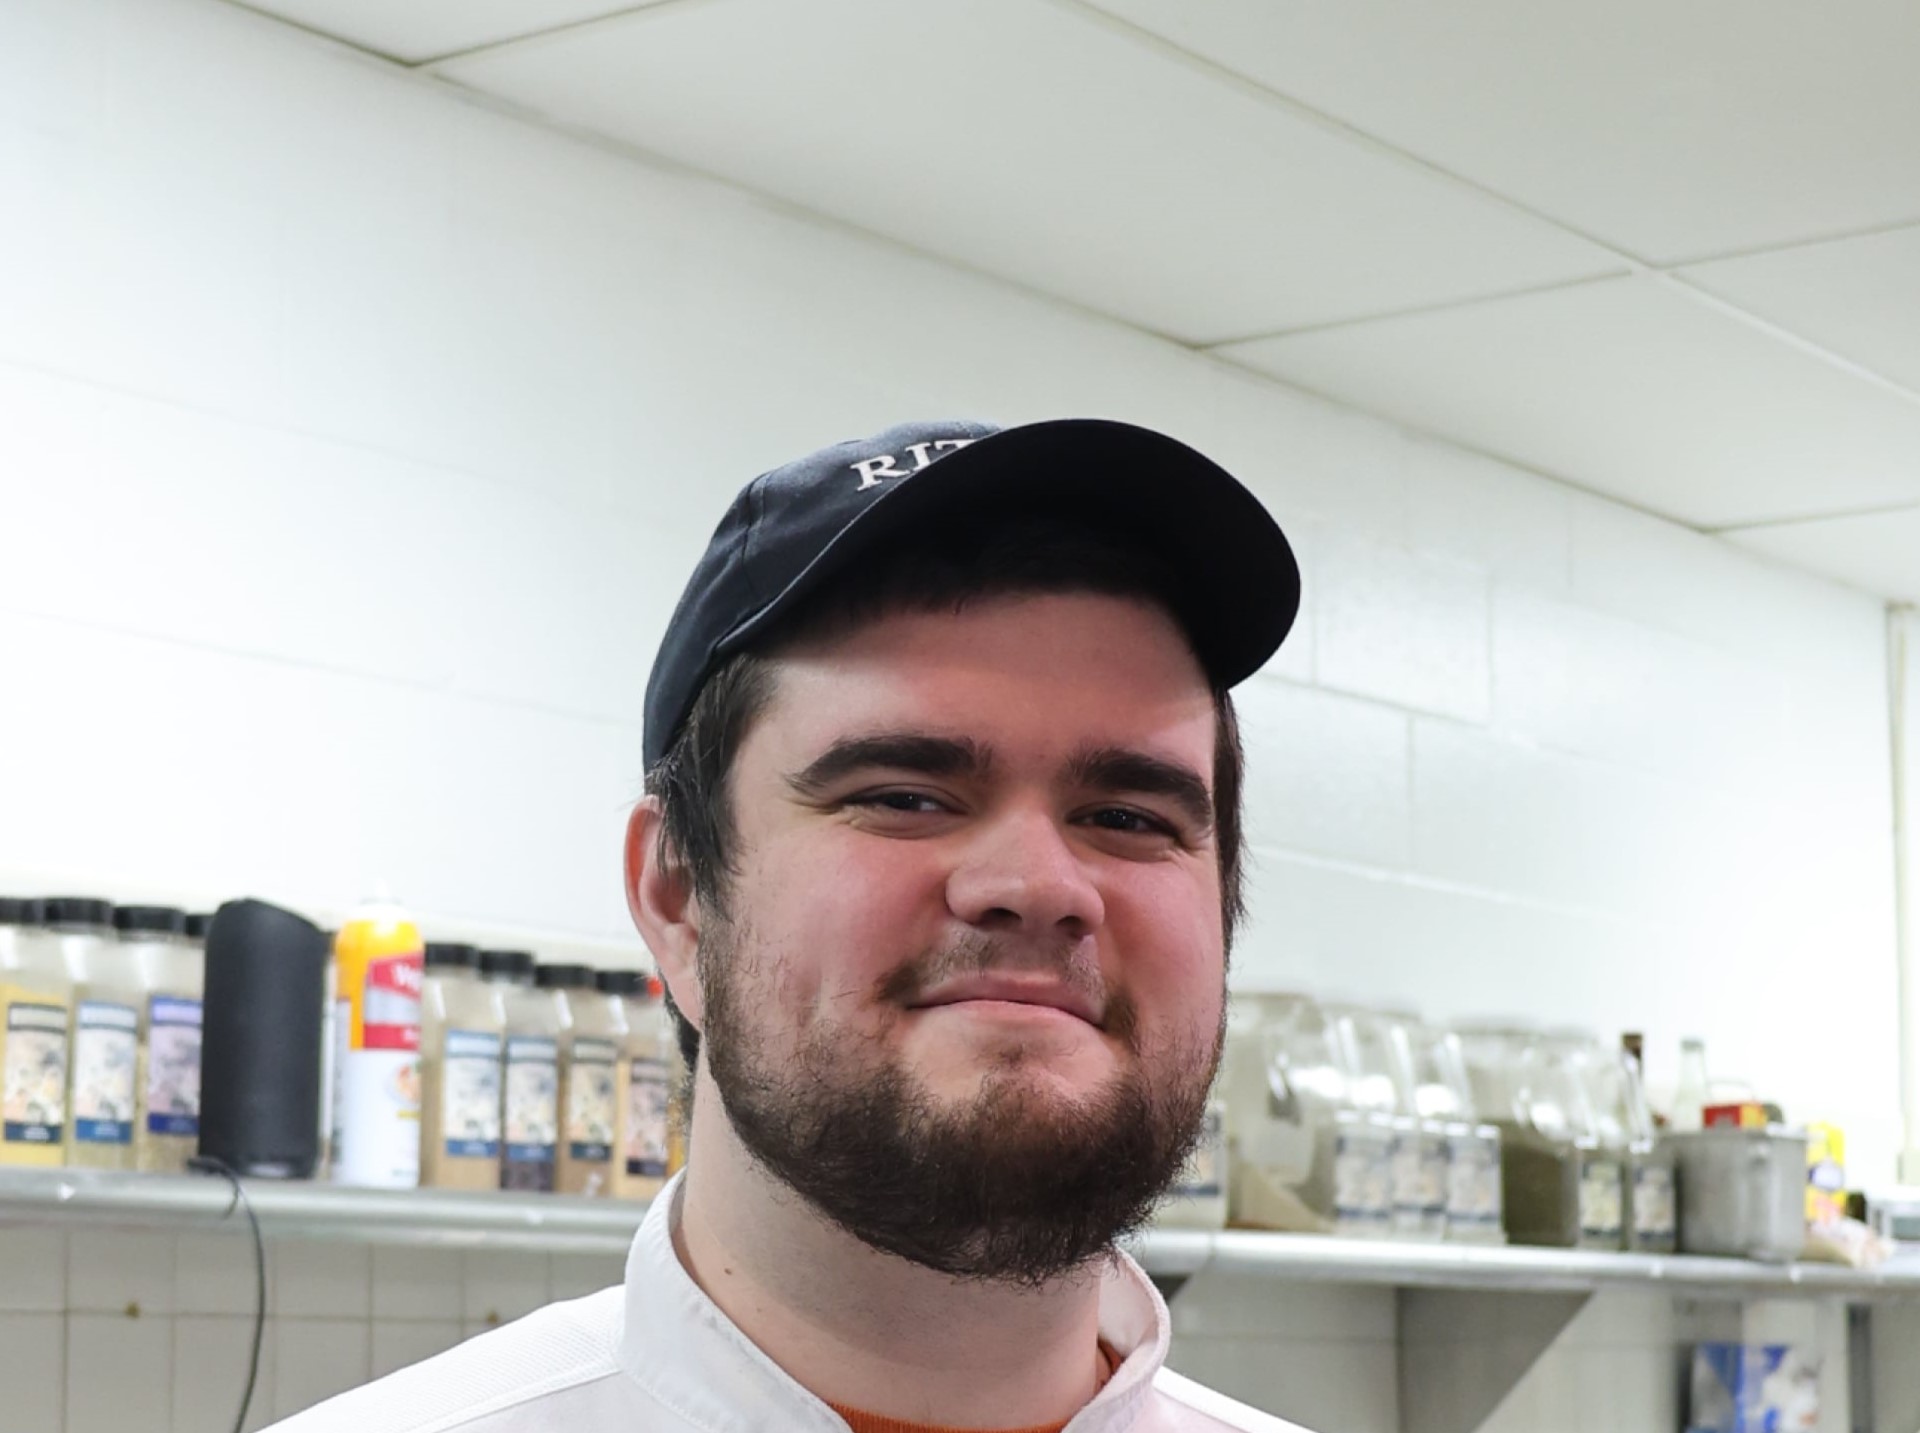 Chef Wood smiling while getting his picture taken. (RIT Dining)